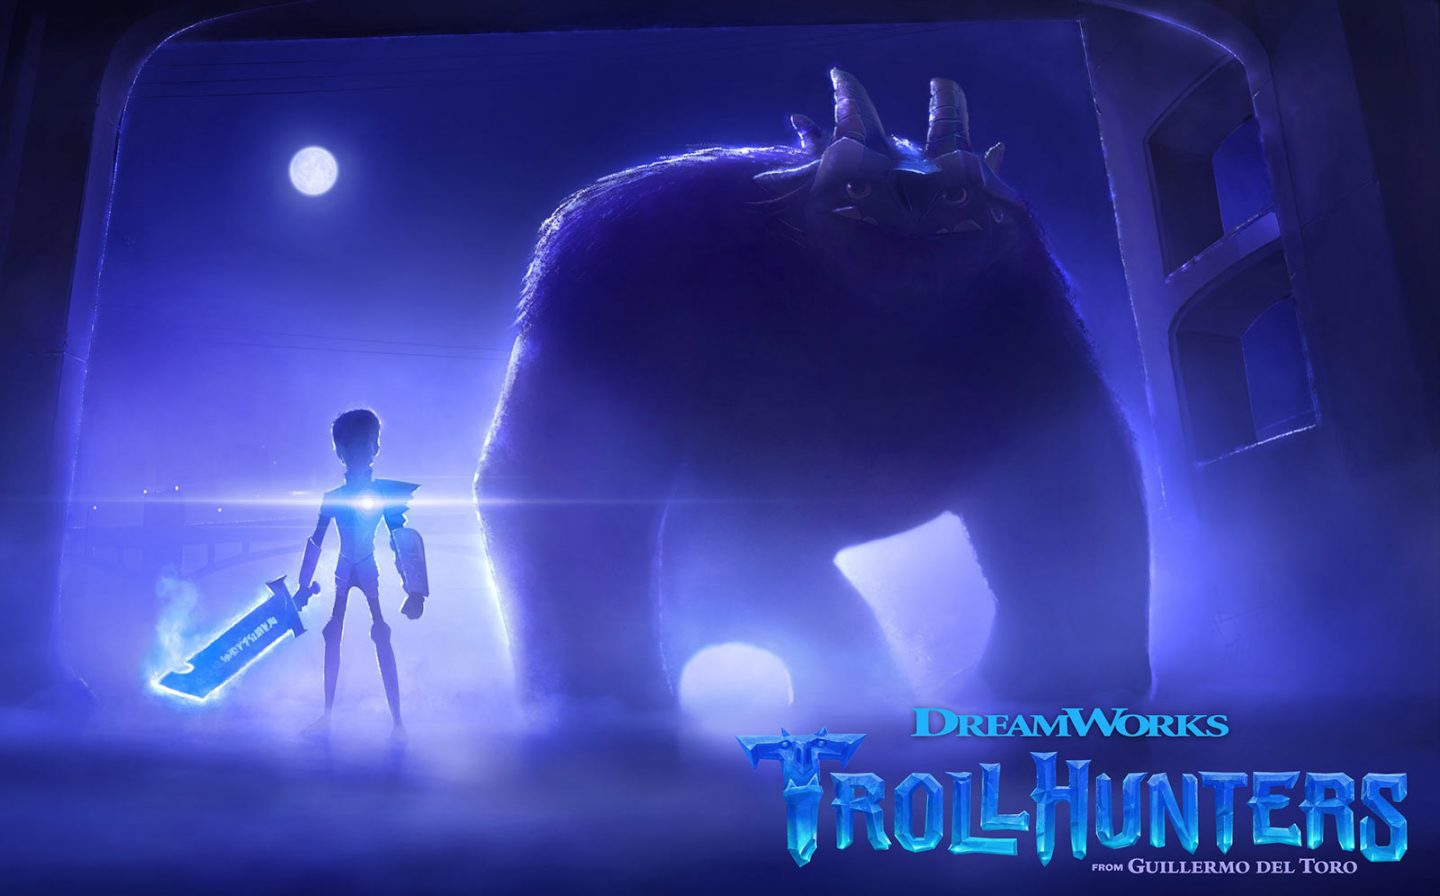 Guillermo del Toro's CG series "Trollhunters" is being produced by Dreamworks Animation for Netflix.